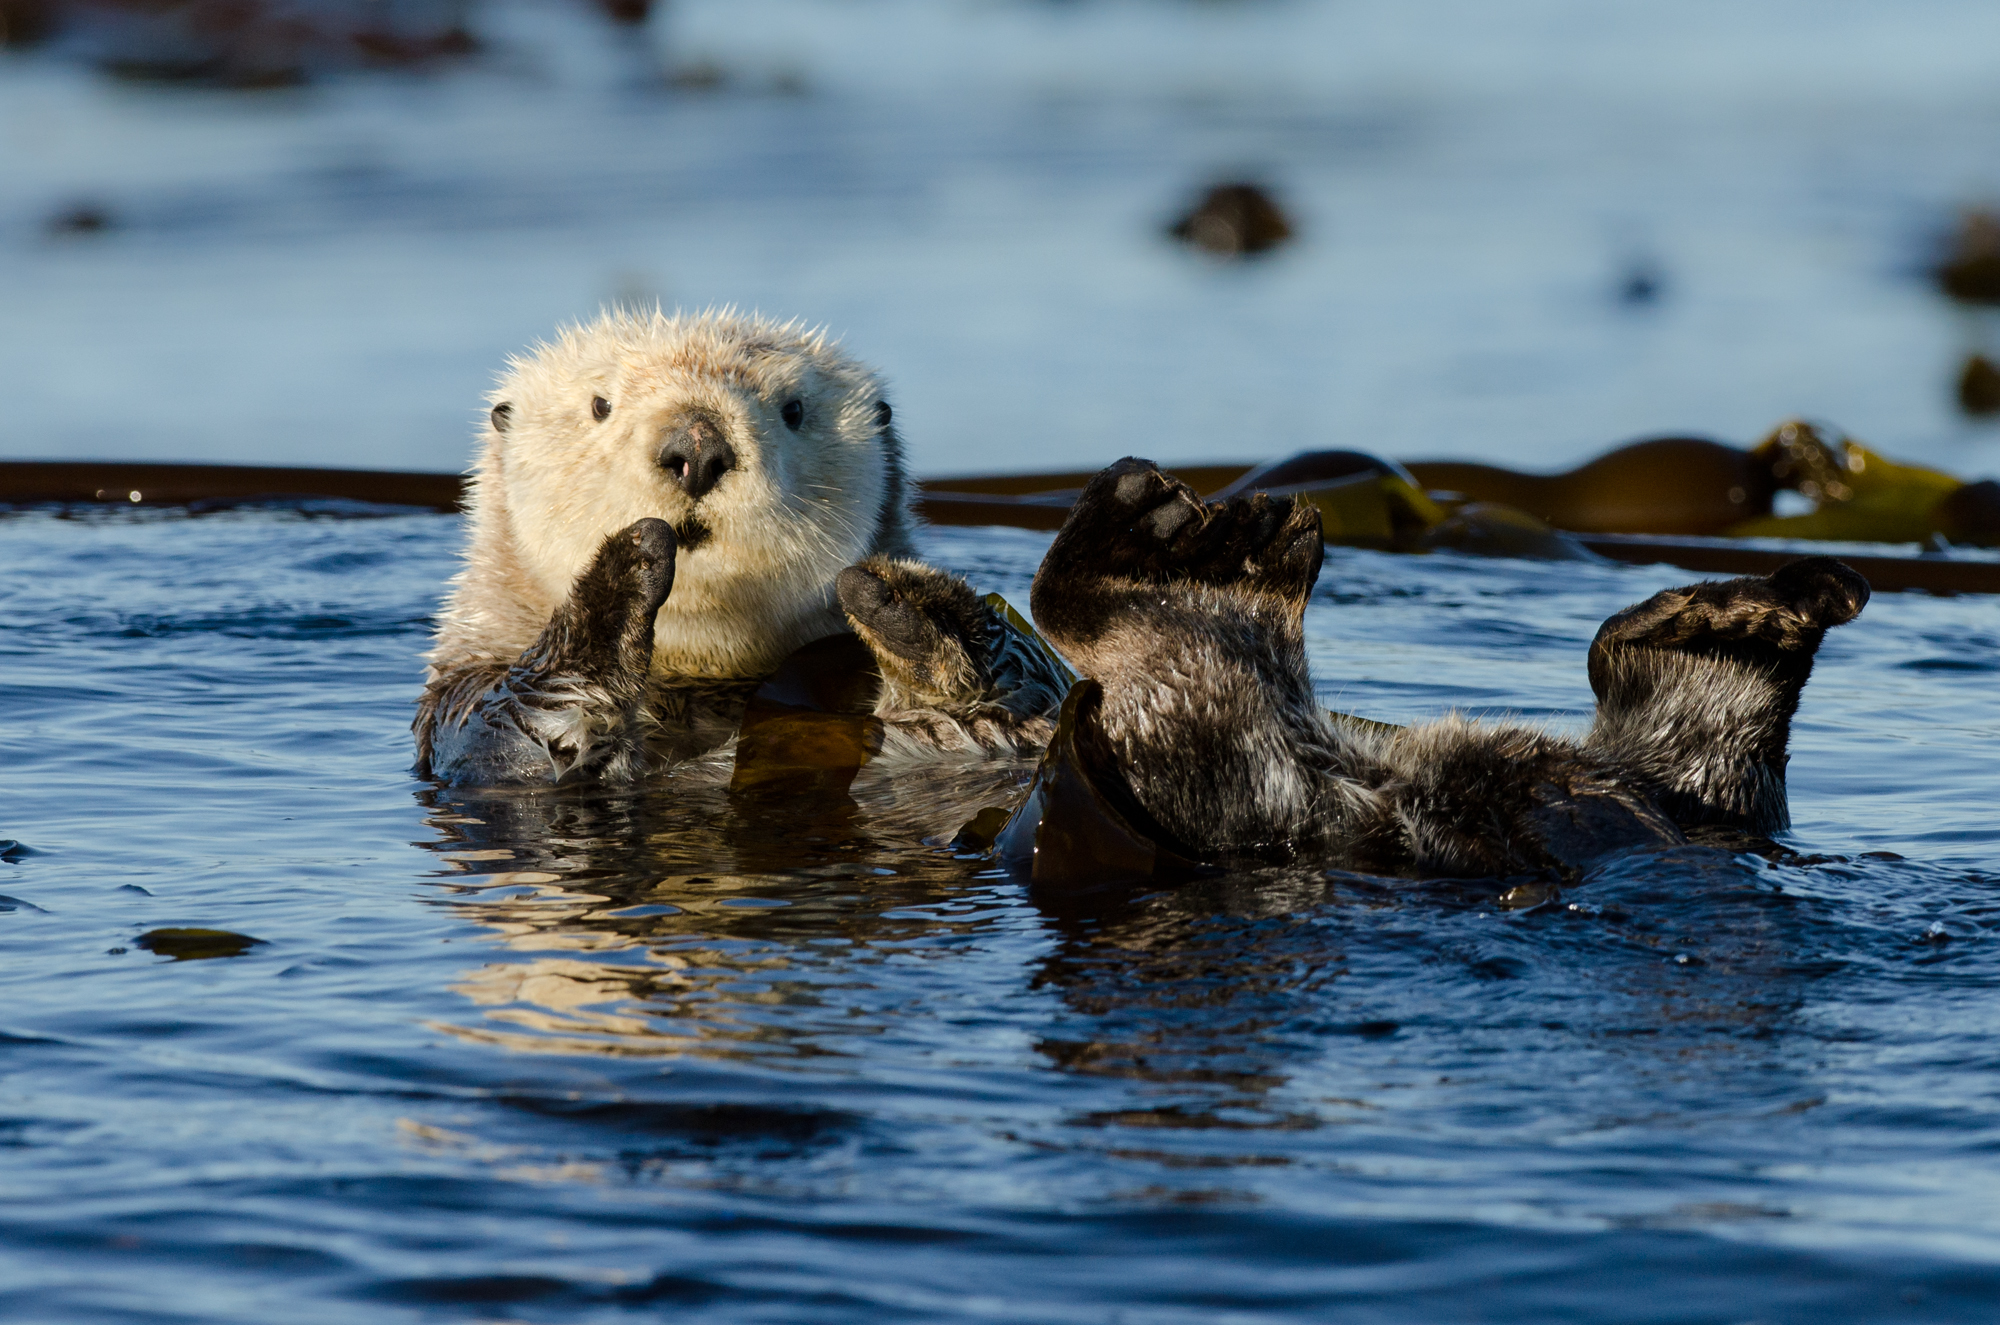  A sea otter wound up in kelp to prevent it drifting away as it sleeps. 